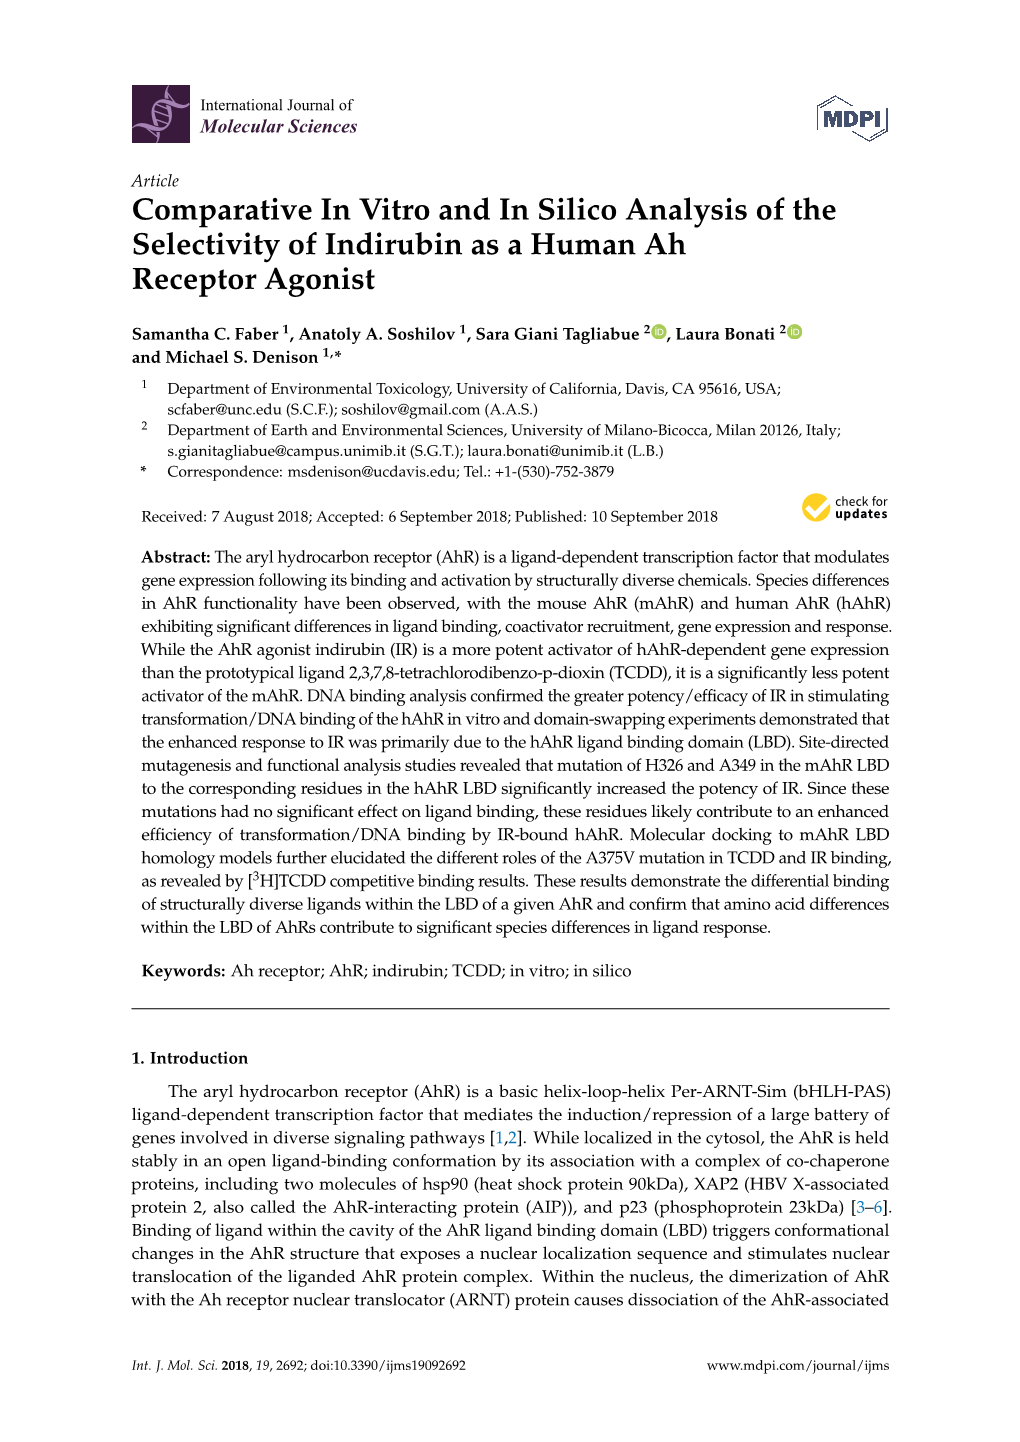 Comparative in Vitro and in Silico Analysis of the Selectivity of Indirubin As a Human Ah Receptor Agonist